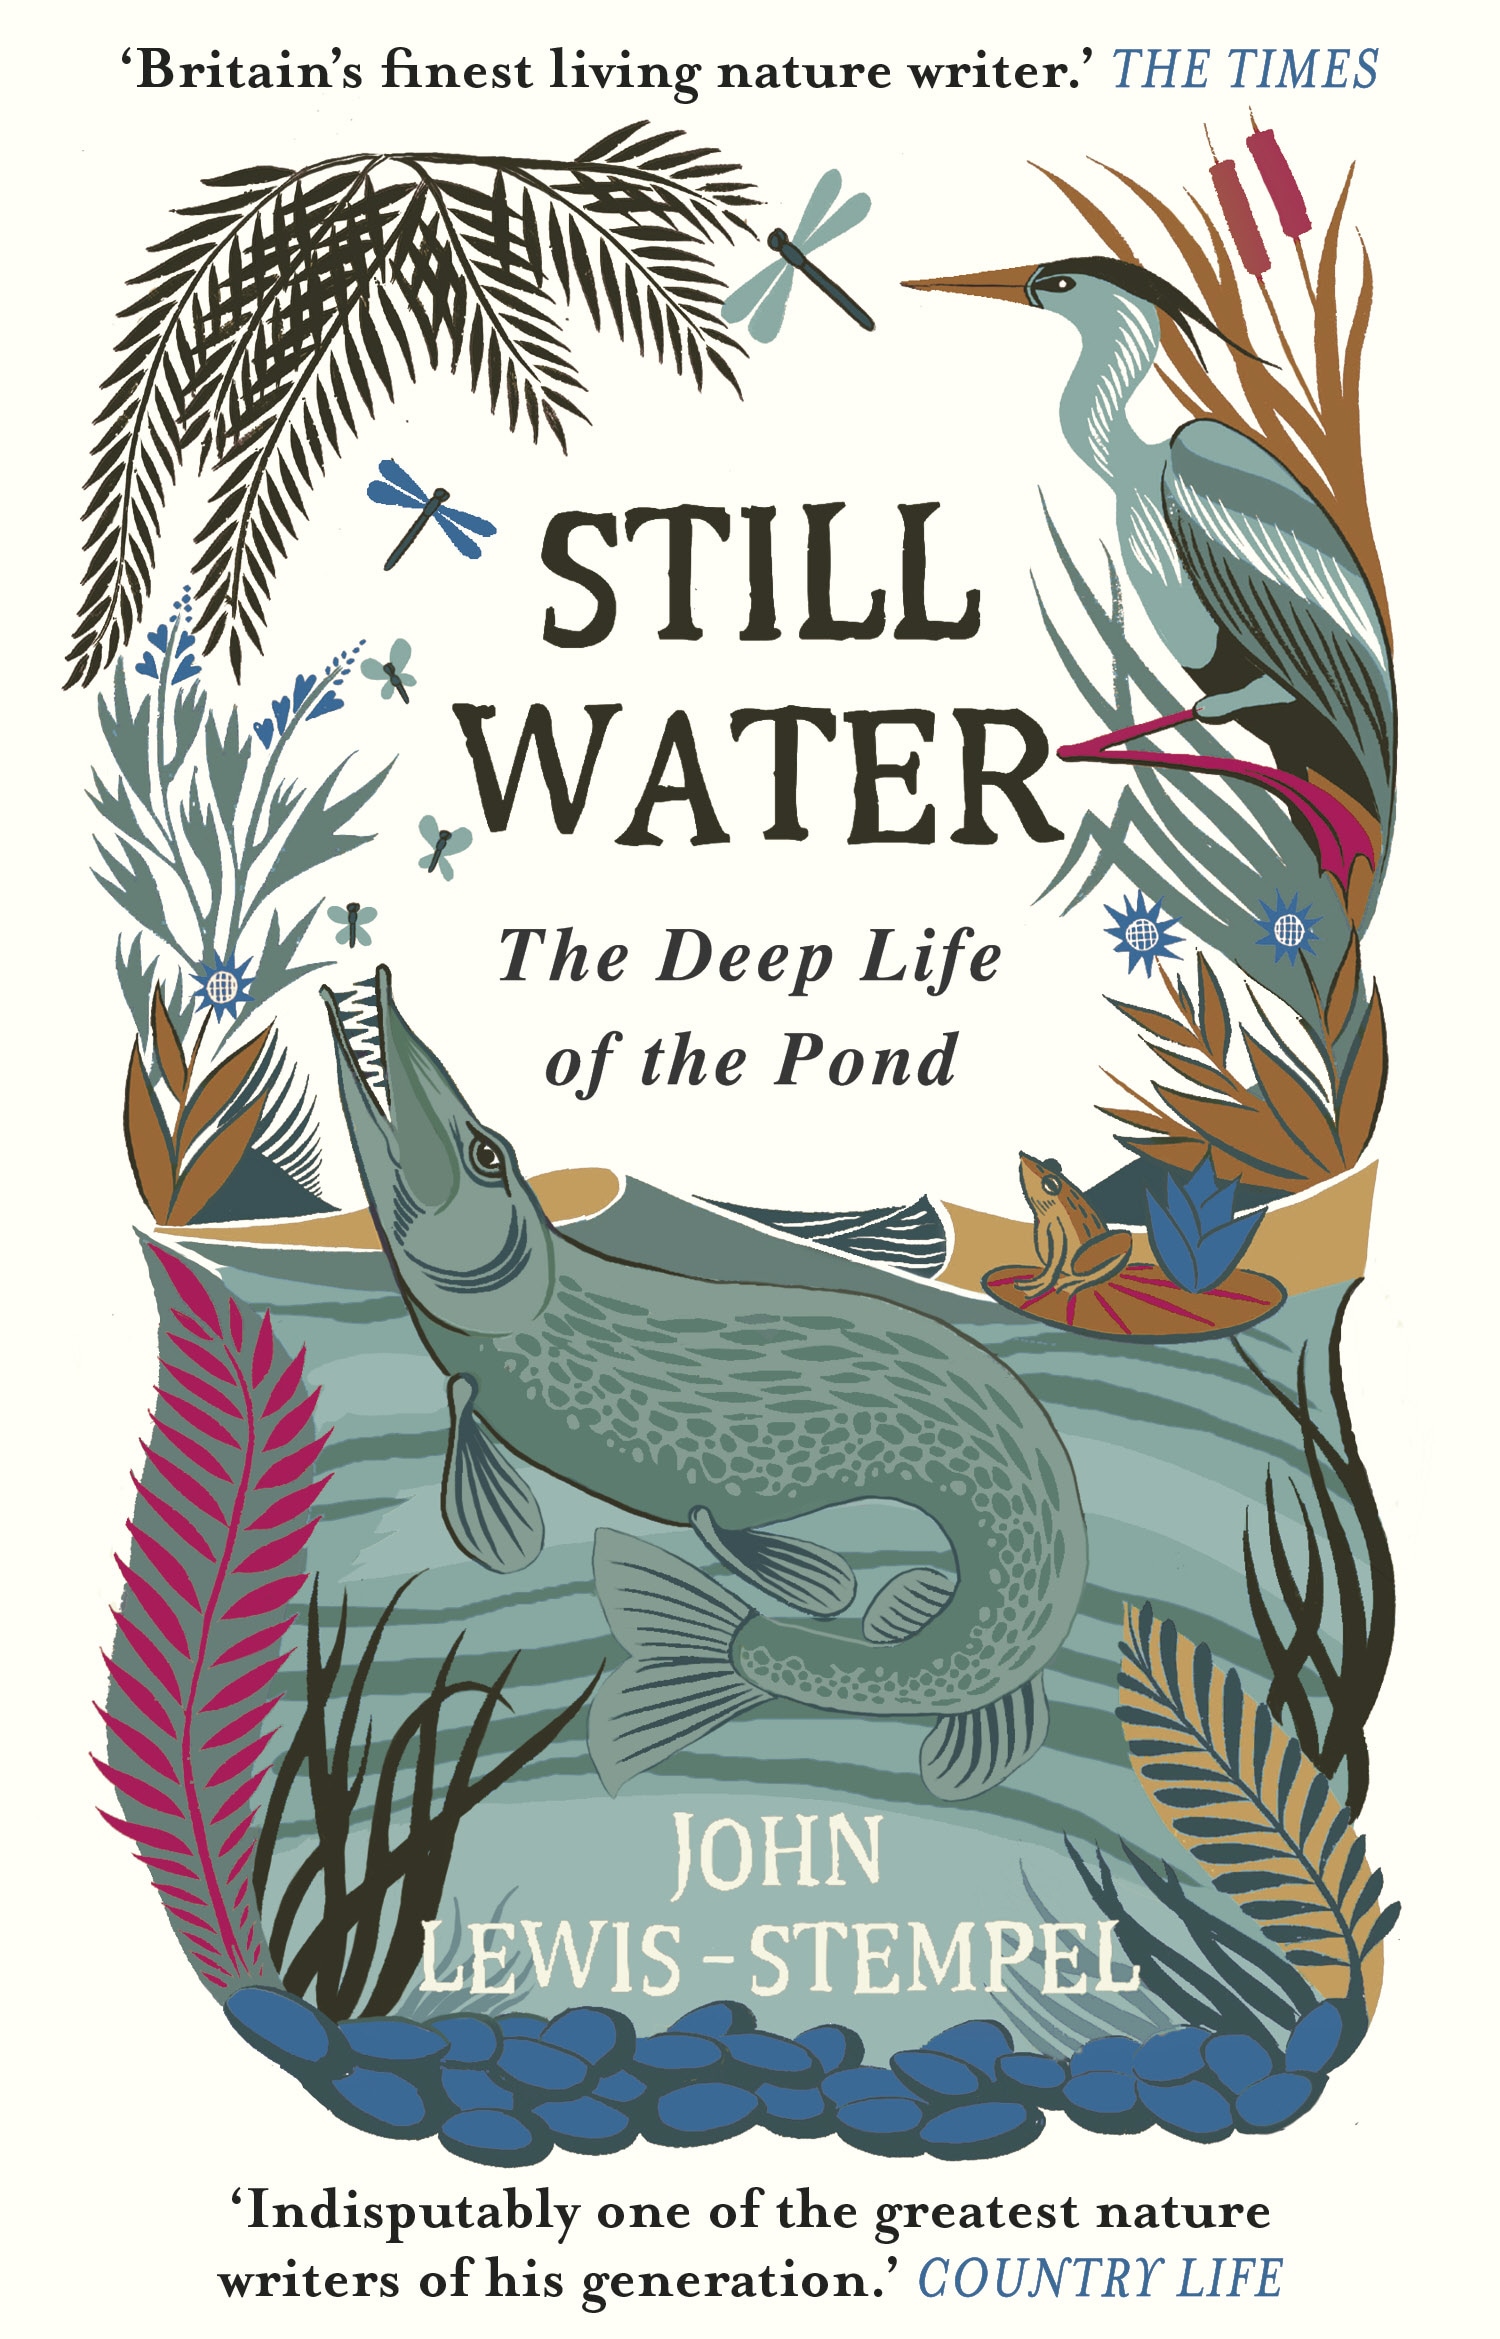 Book “Still Water” by John Lewis-Stempel — March 5, 2020